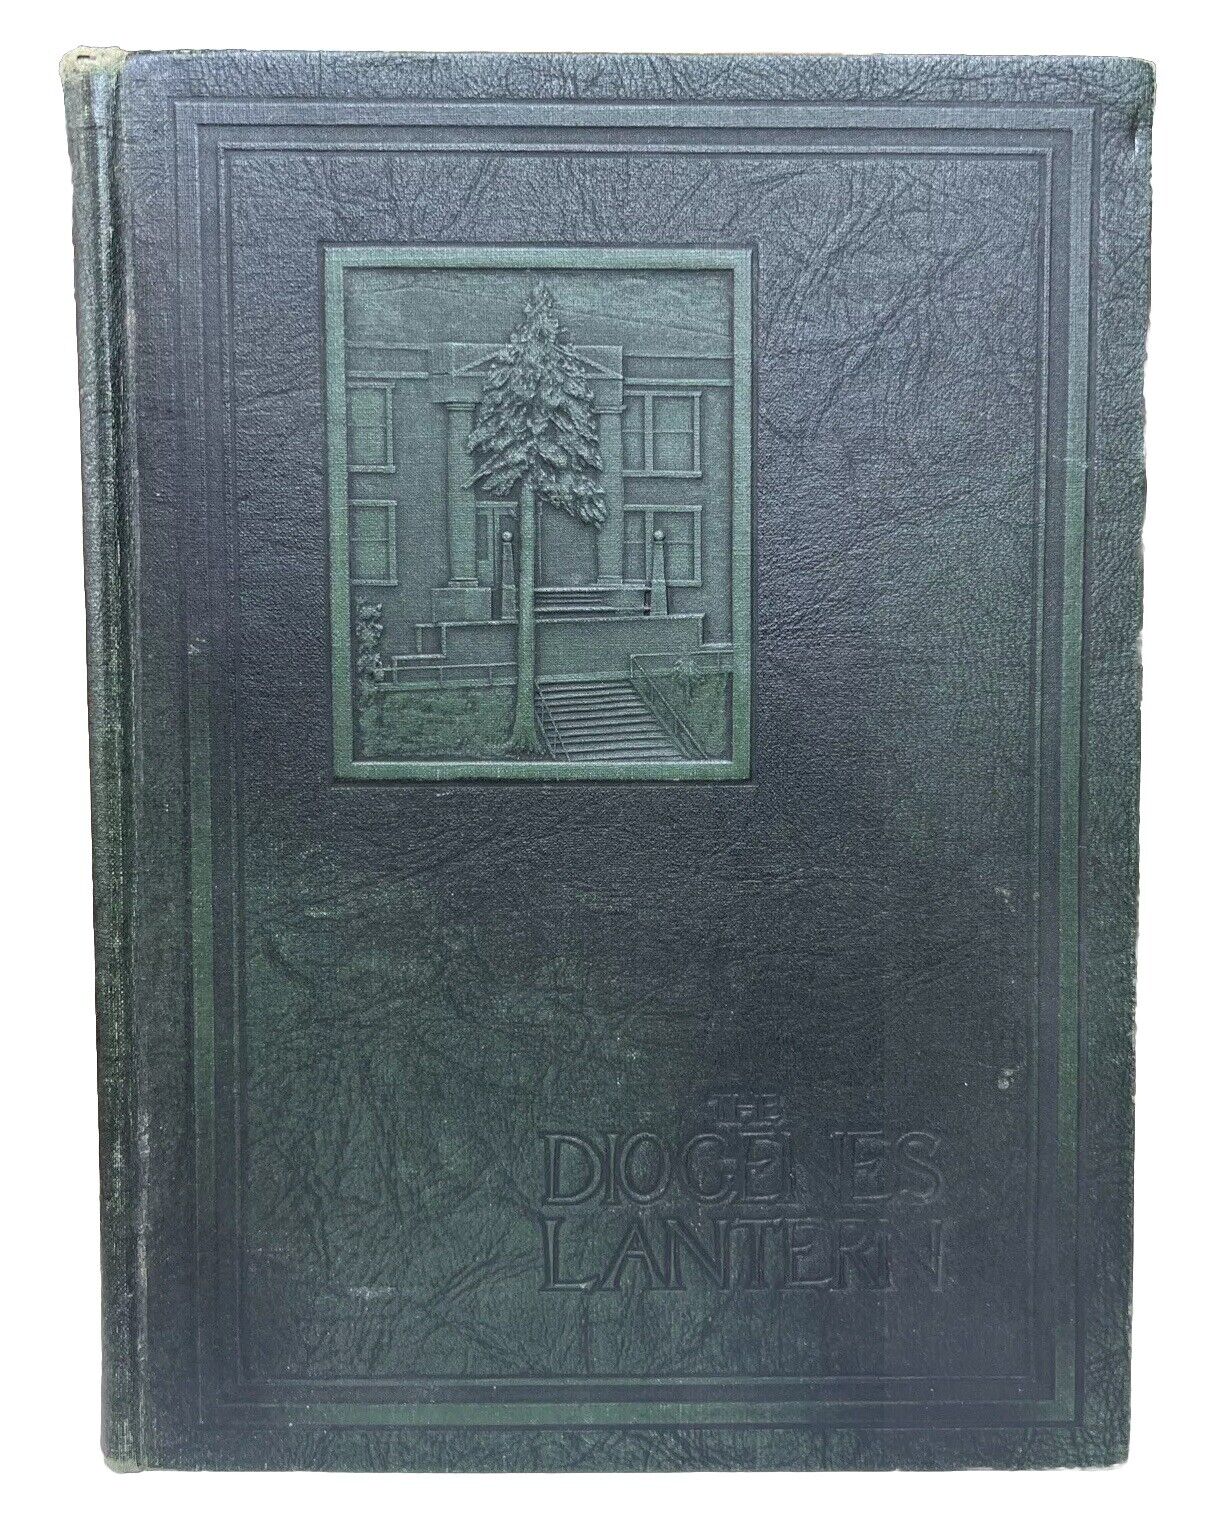 1928 Pacific Union College Yearbook Diogenes Lantern. Adventist Angwin Napa~